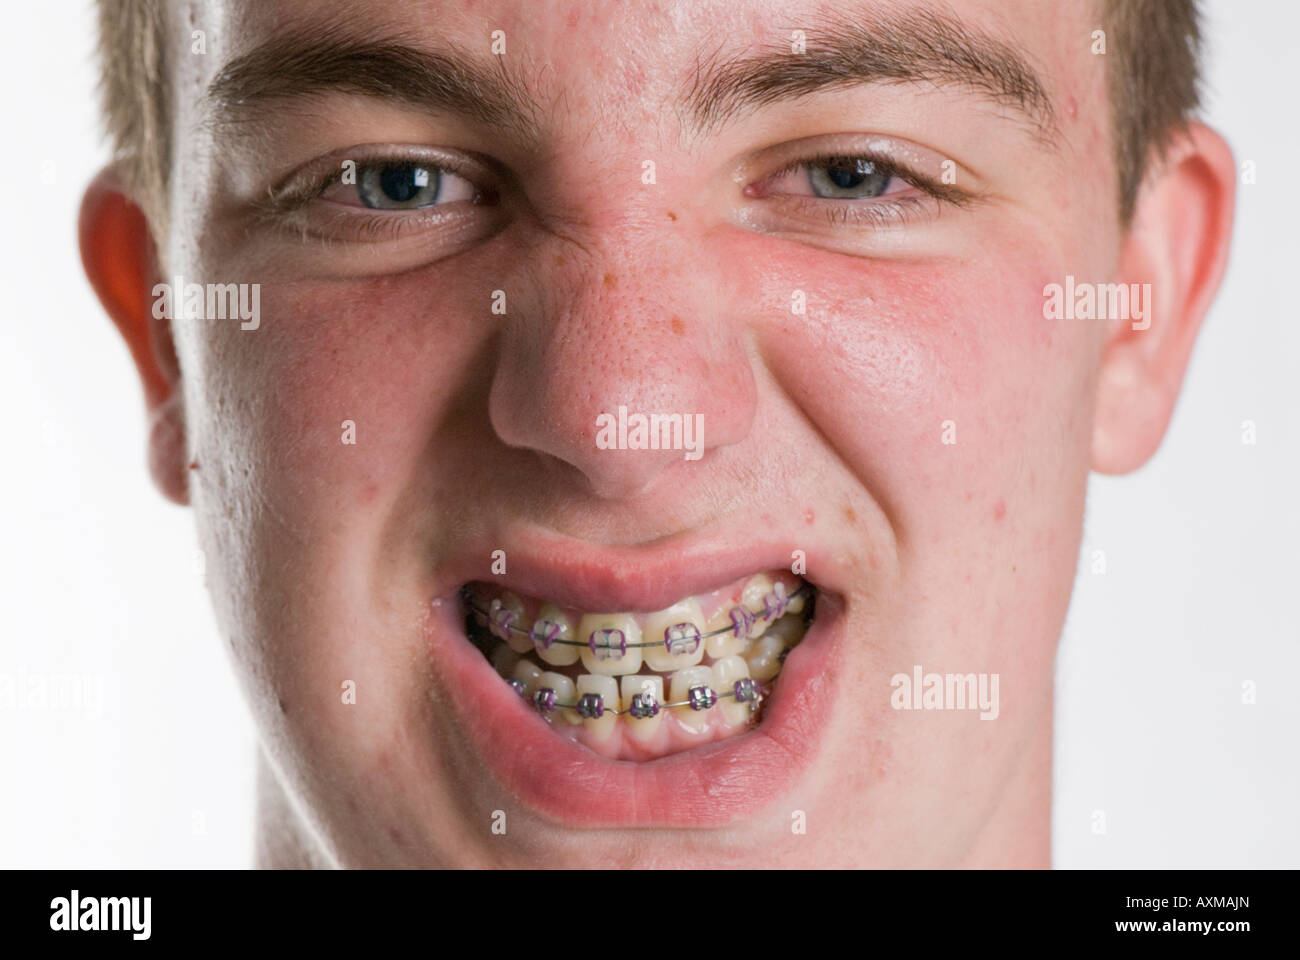 Teenage boy with acne and braces Stock Photo